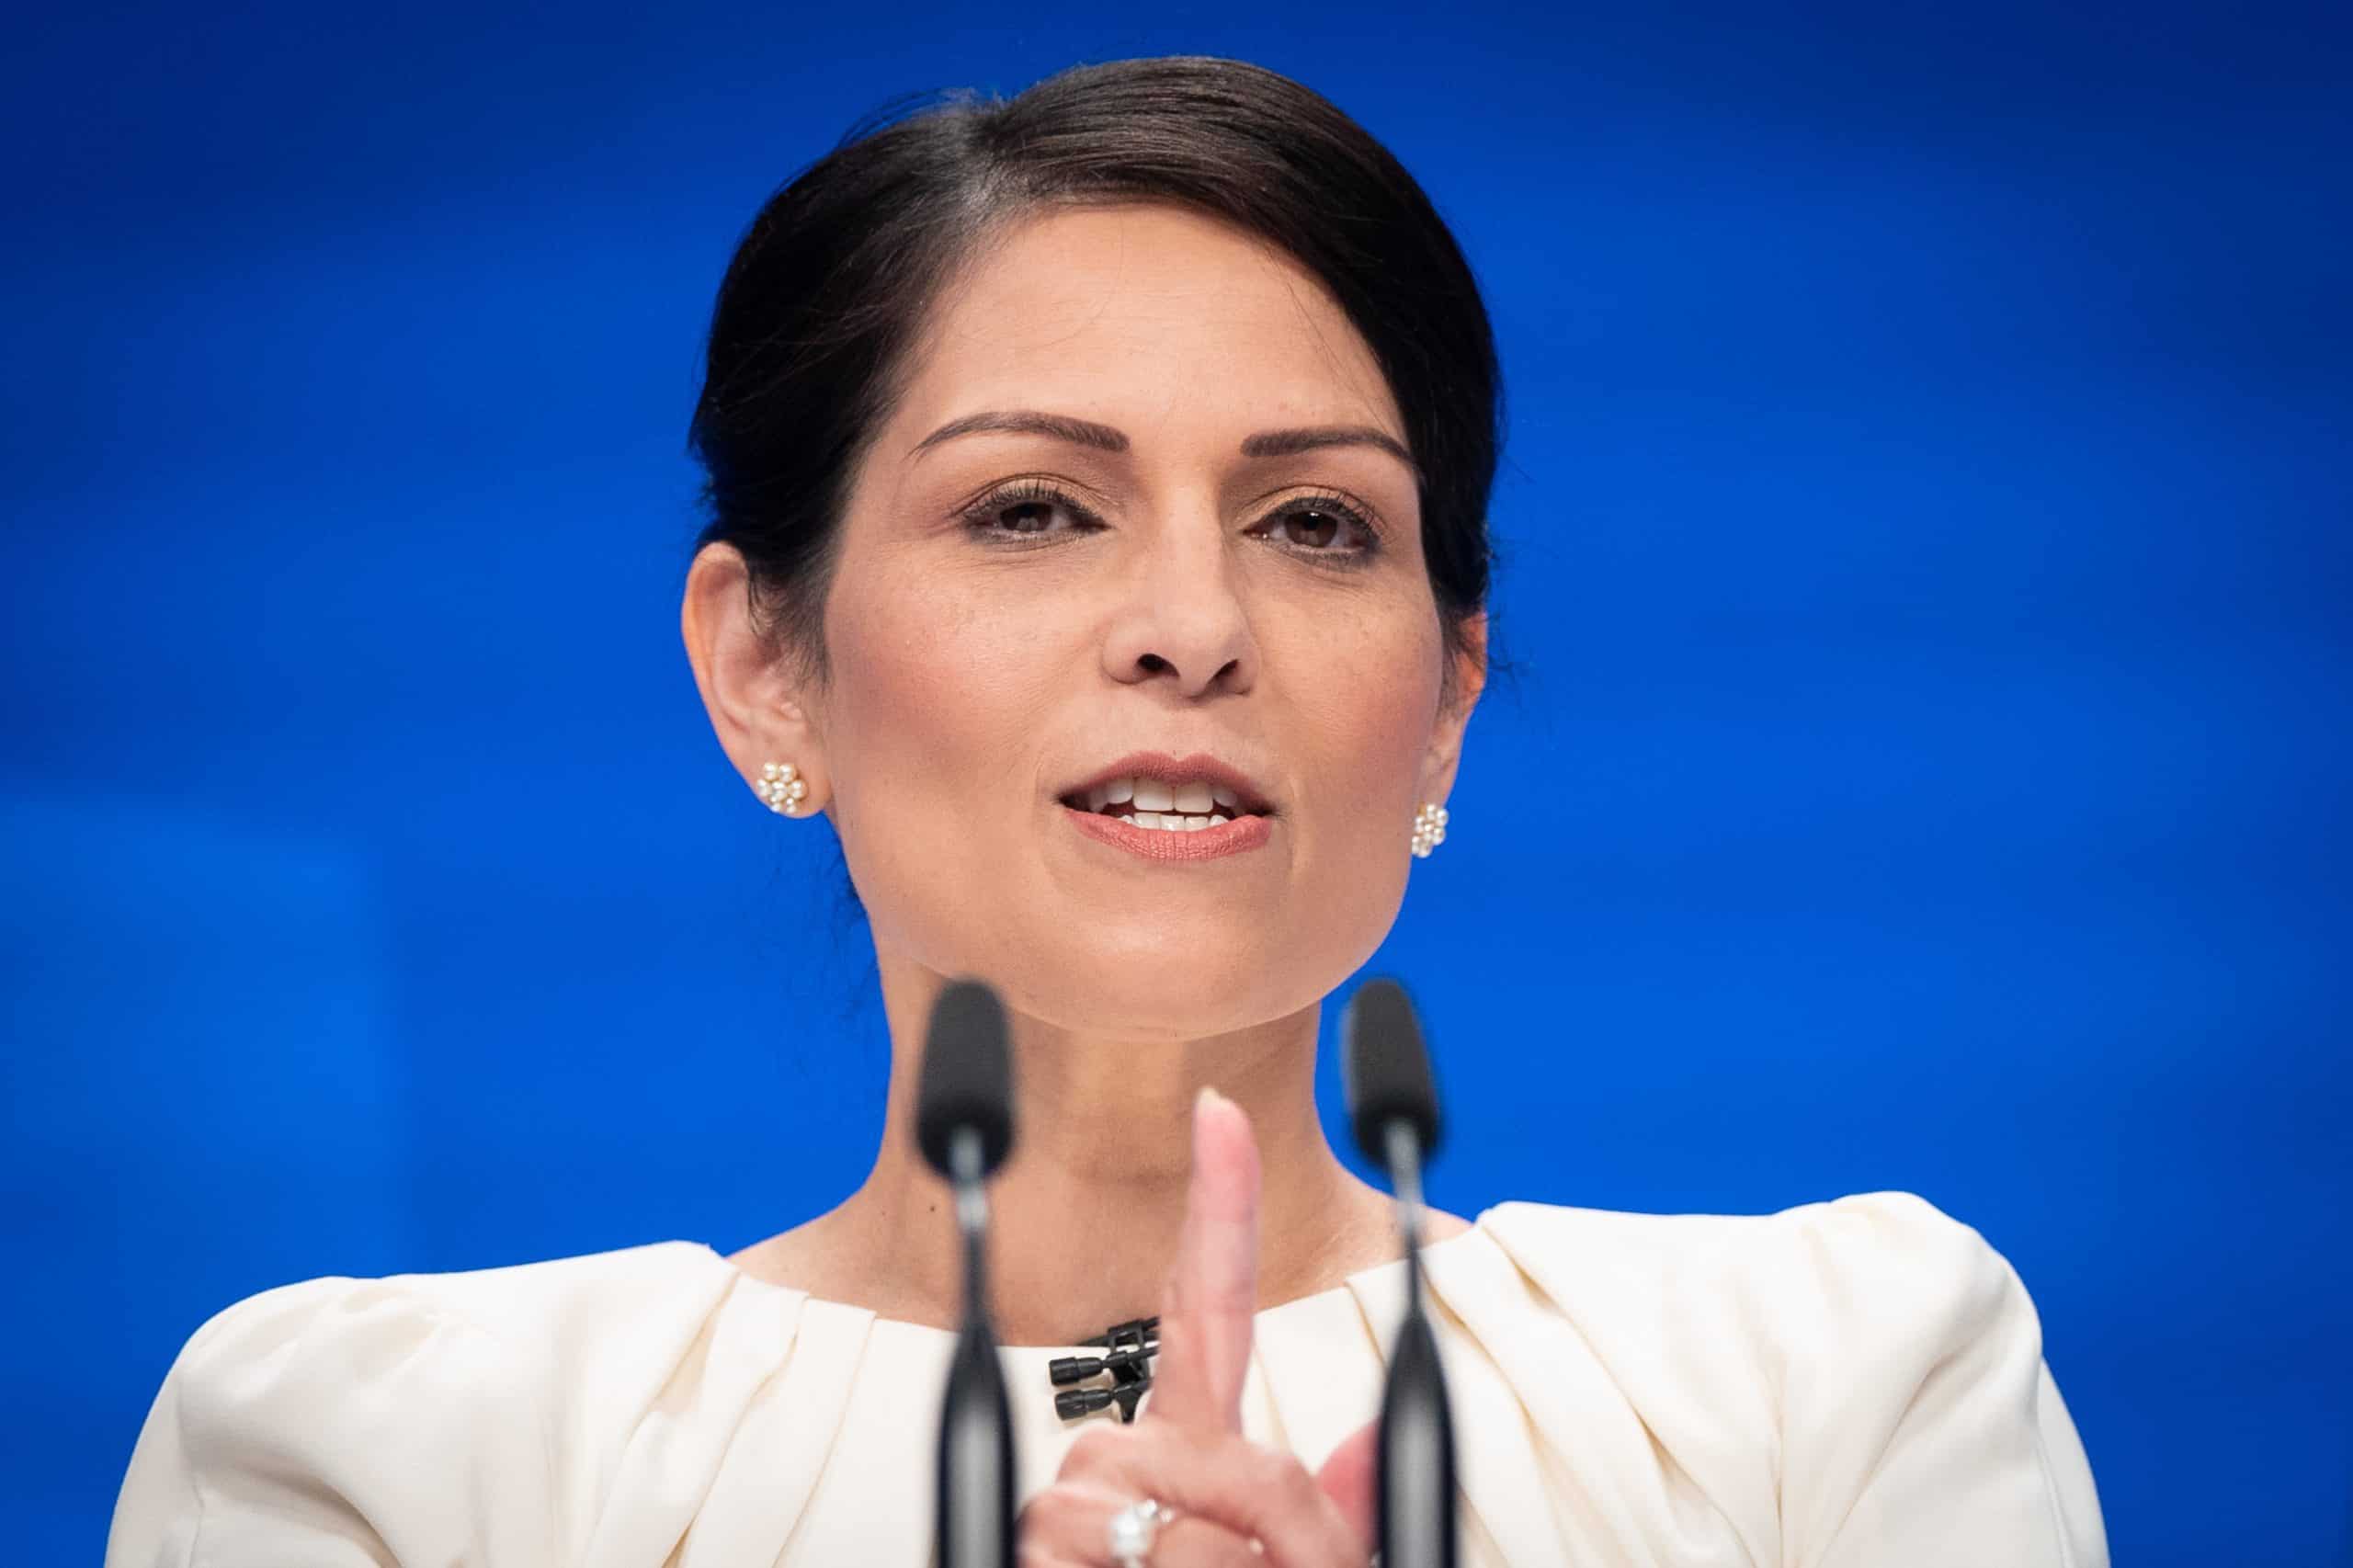 Demands for Priti Patel to apologise as she plans ‘Greek-style clampdown’ on migrants